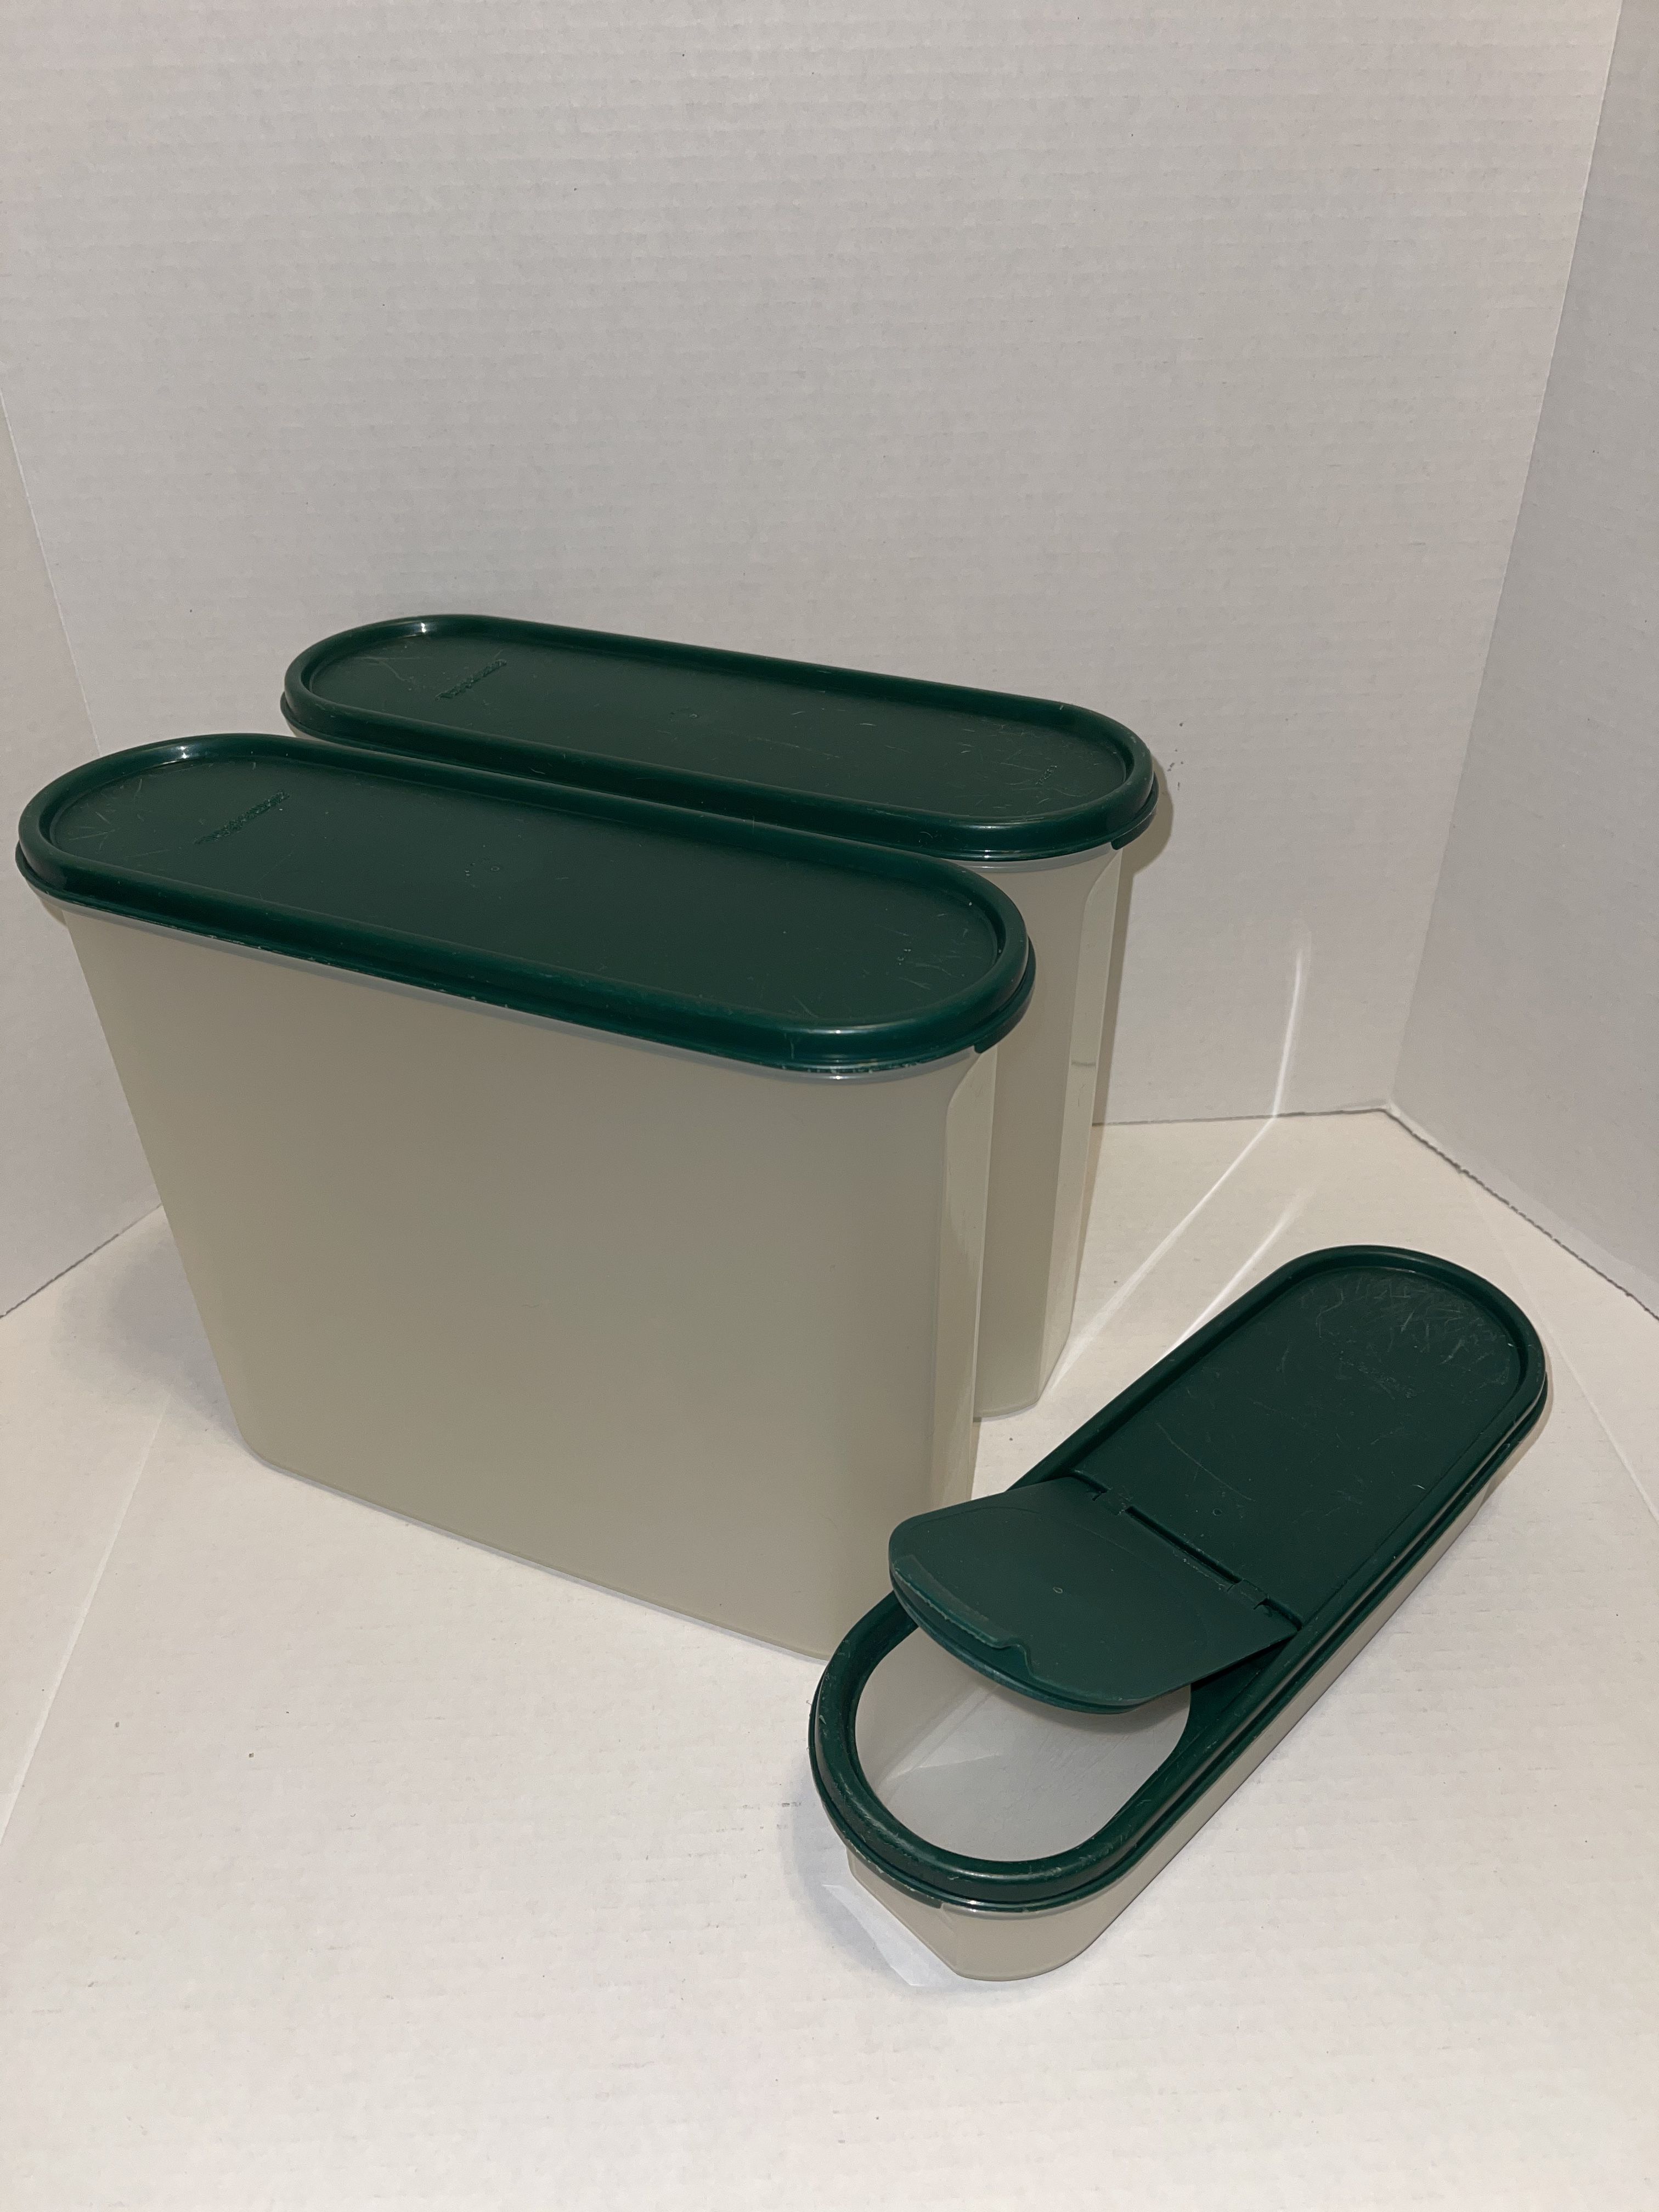 3 Tupperware modular mates super oval storage containers with green seals lids #1 & #4